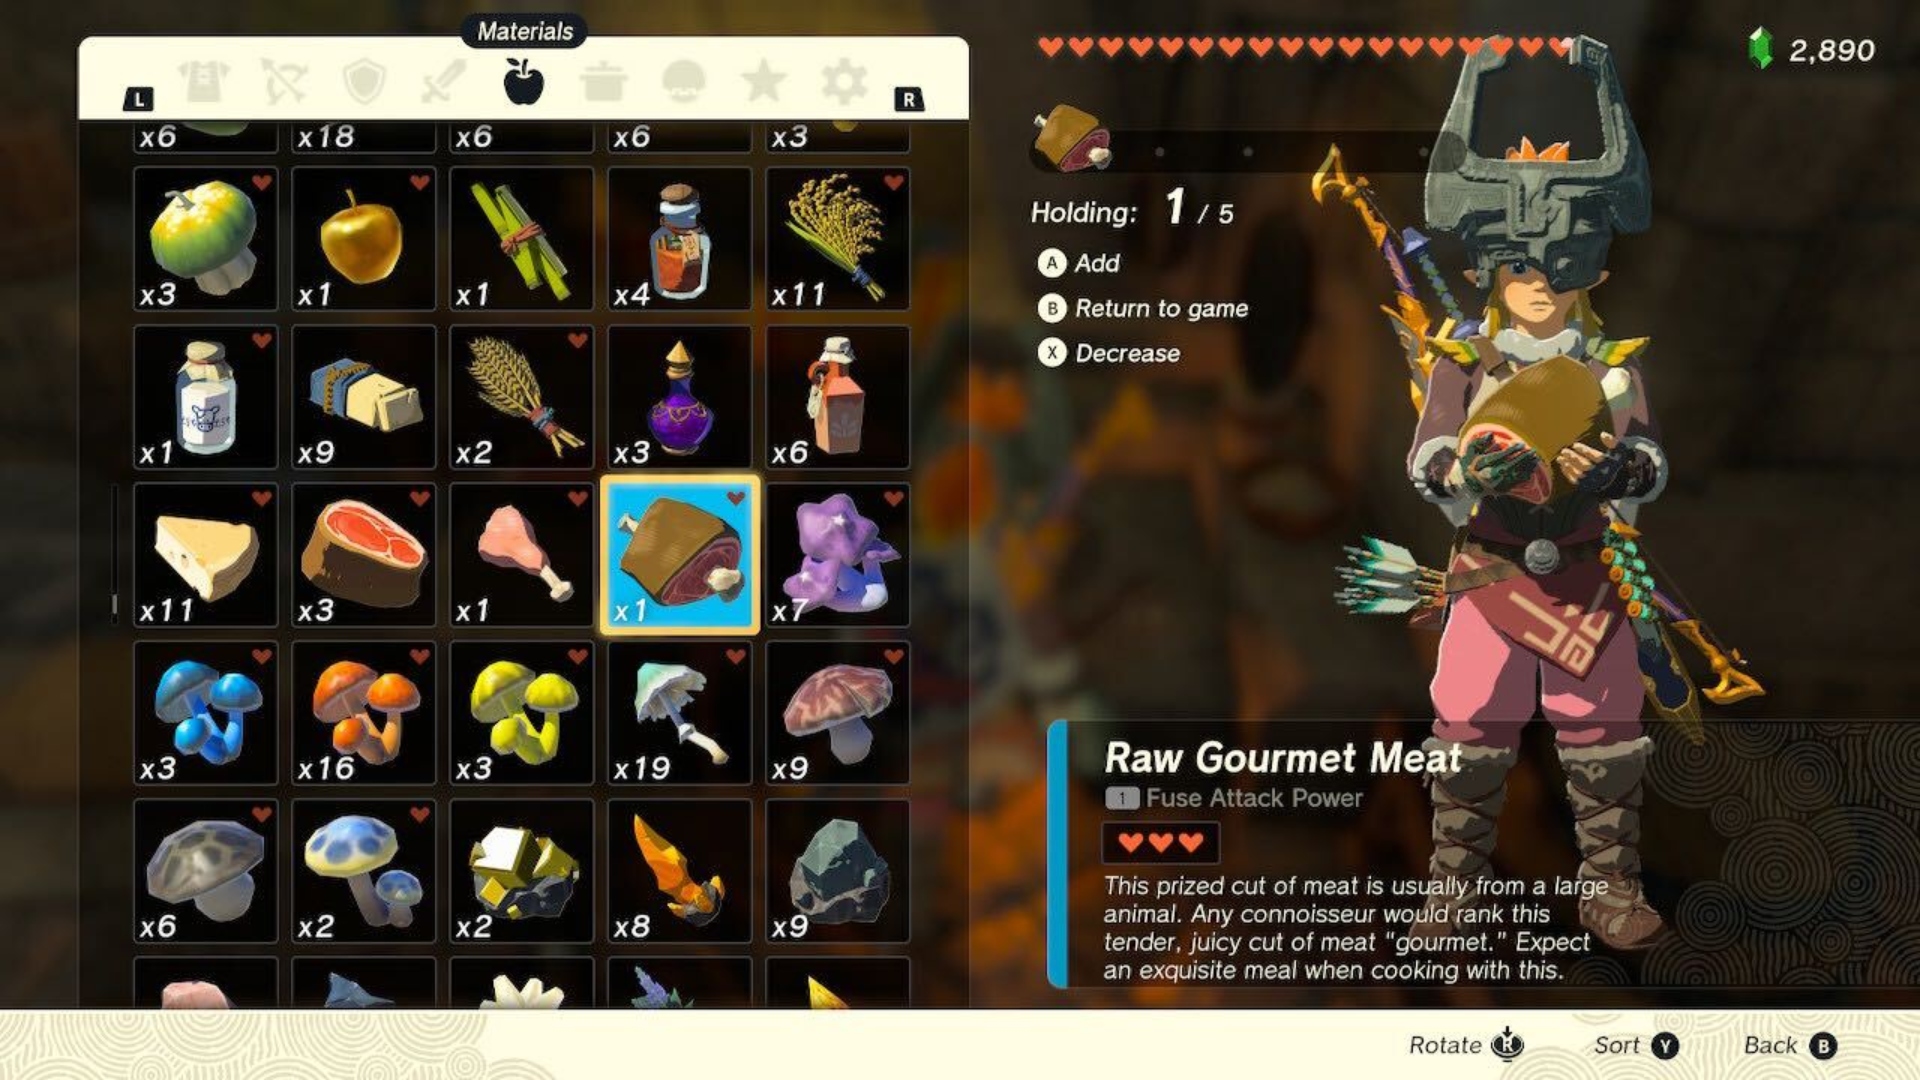 Link holding some Raw Gourmet Meat.